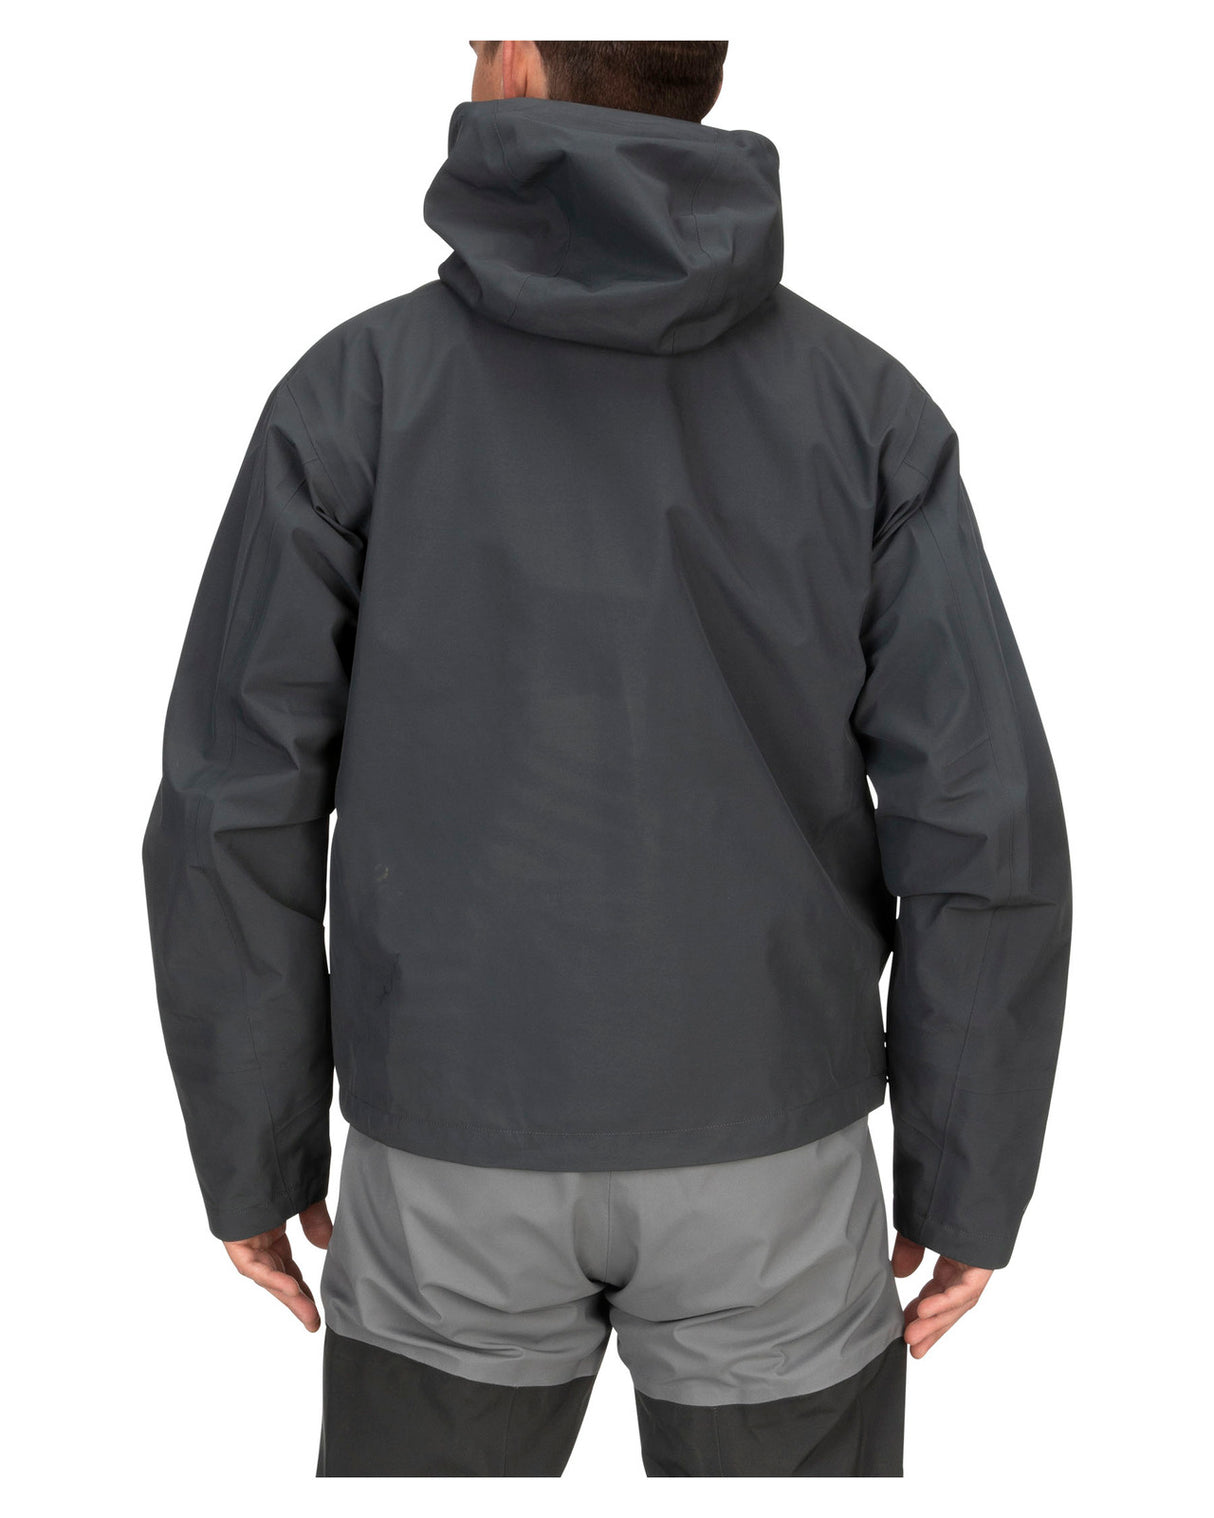 Simms Guide Classic Jacket - Carbon